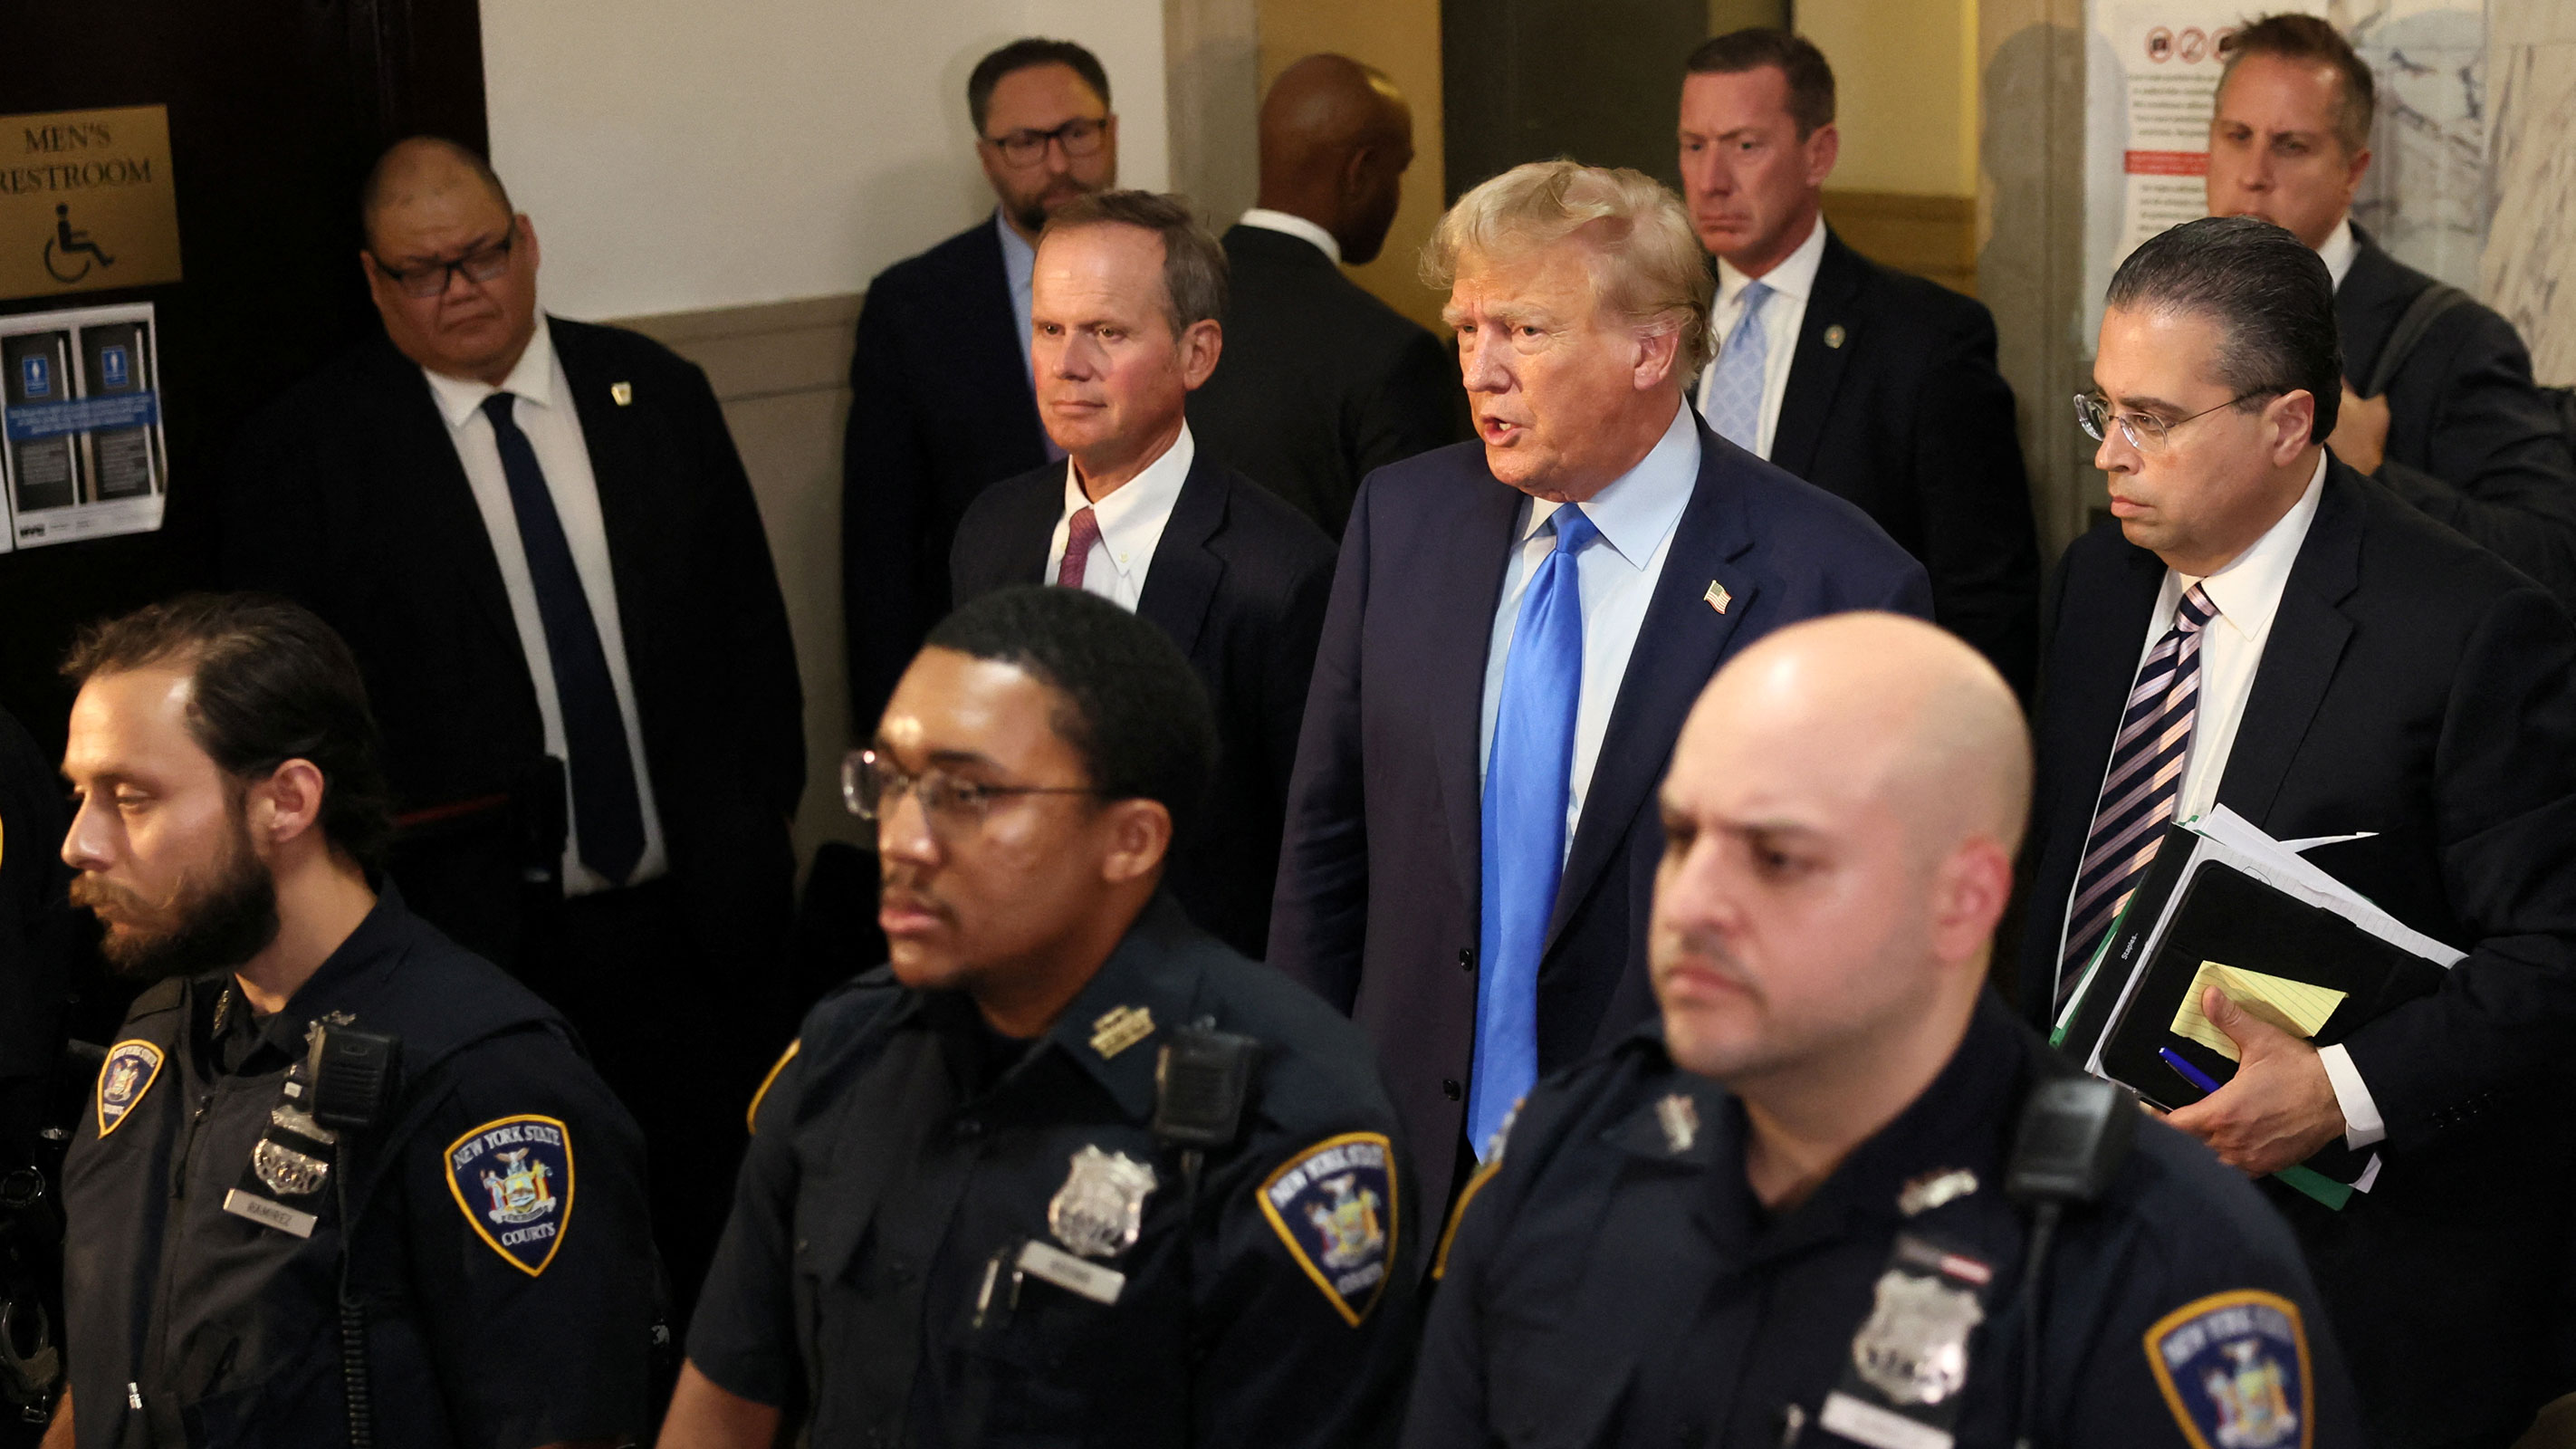 Former President Donald Trump speaks at a Manhattan courthouse, where he attends the trial of himself, his adult sons, the Trump Organization and others in a civil fraud case brought by state Attorney General Letitia James, in New York City, on Monday.